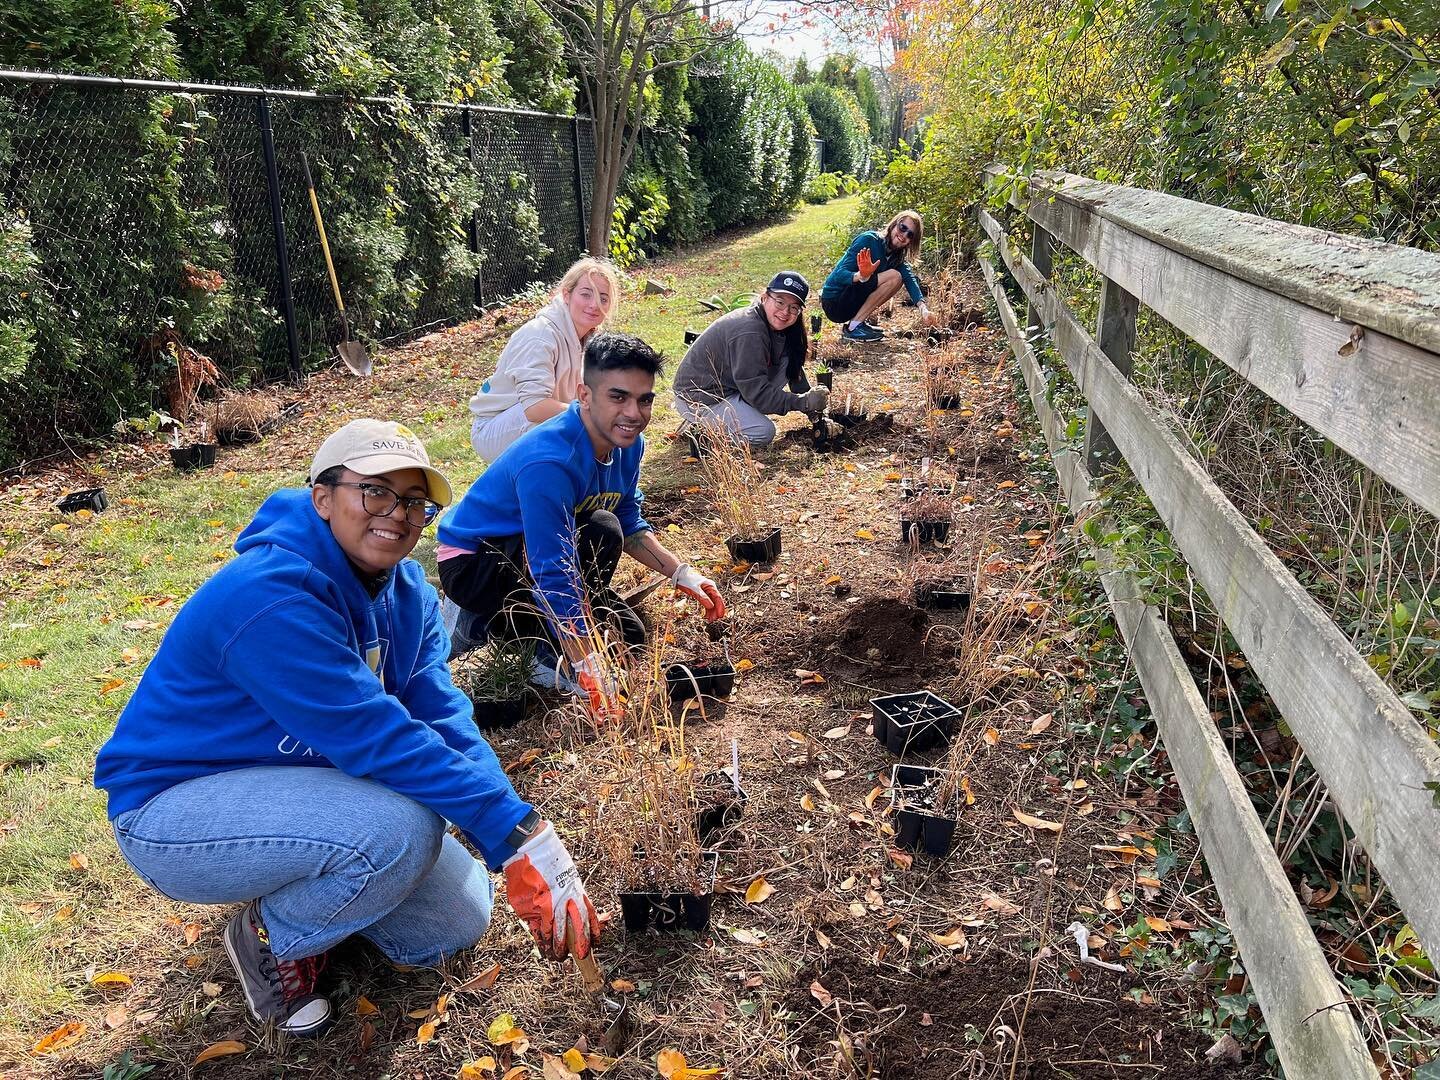 Dr. J Bret Bennington, of the Department of Geology, Environment, and Sustainability from Hofstra University, planted LINPI&rsquo;s ecotype plants to expand Hofstra&rsquo;s Bird Sanctuary.  The professor and his students also came to volunteer cleani